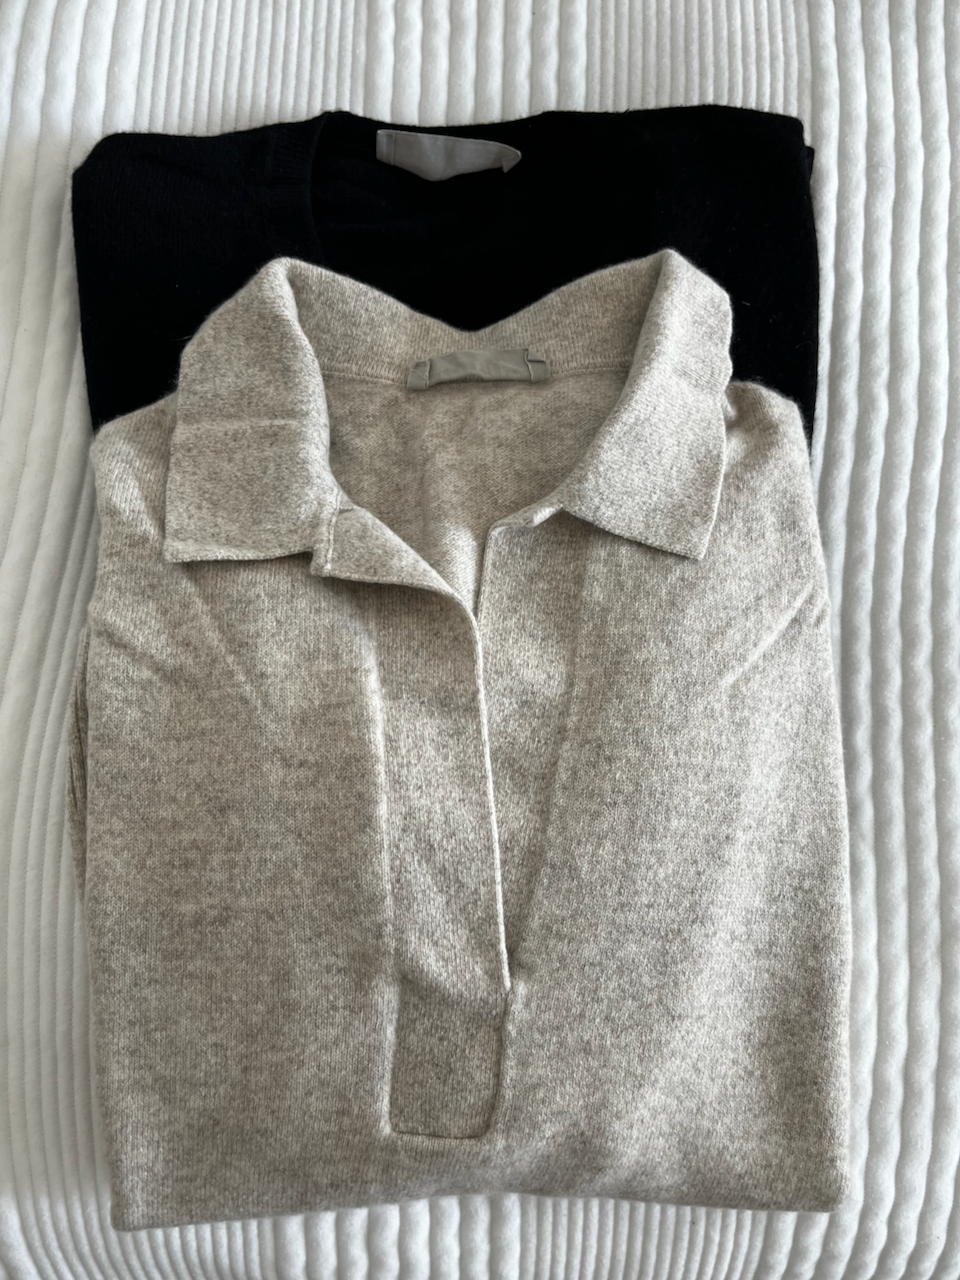 My favourite pieces from Everlane's cashmere-inspired collections